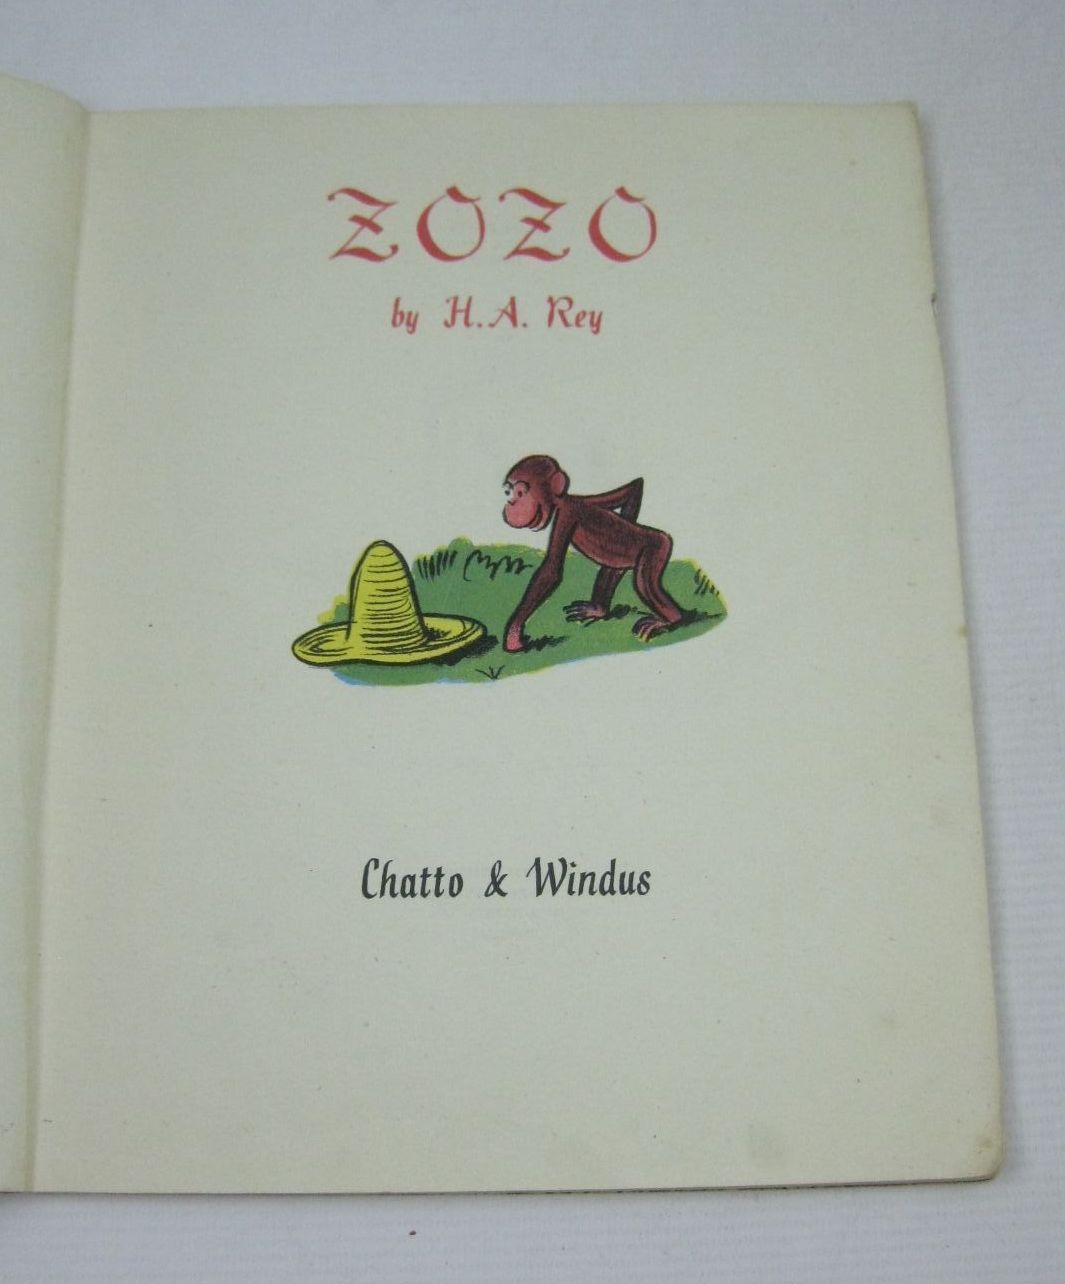 Photo of ZOZO written by Rey, H.A. illustrated by Rey, H.A. published by Chatto & Windus (STOCK CODE: 1405802)  for sale by Stella & Rose's Books